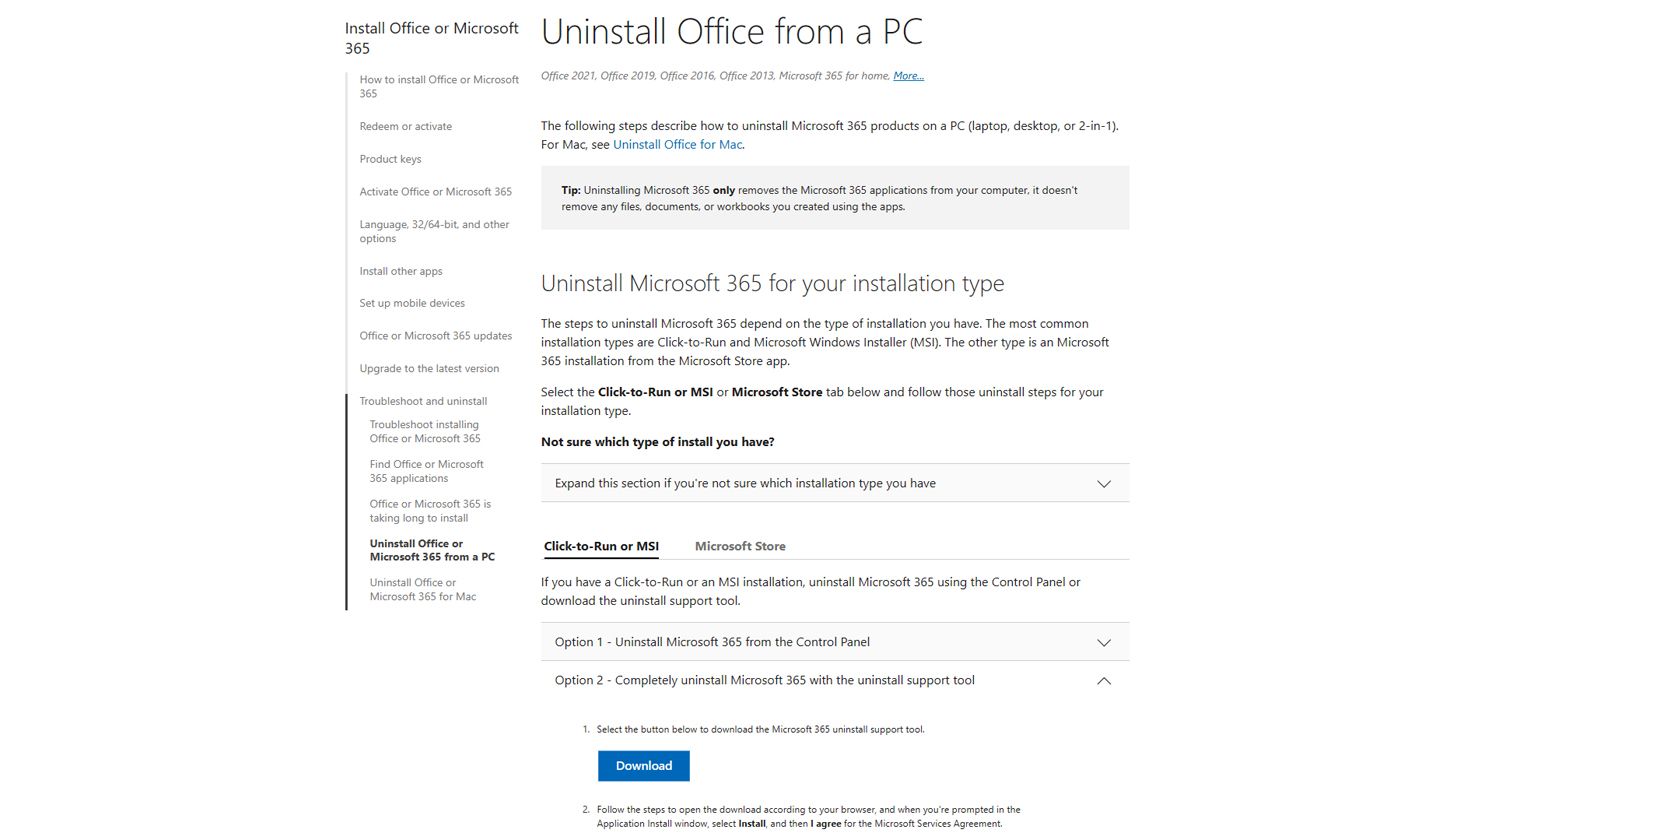 Uninstall Office from a PC support page